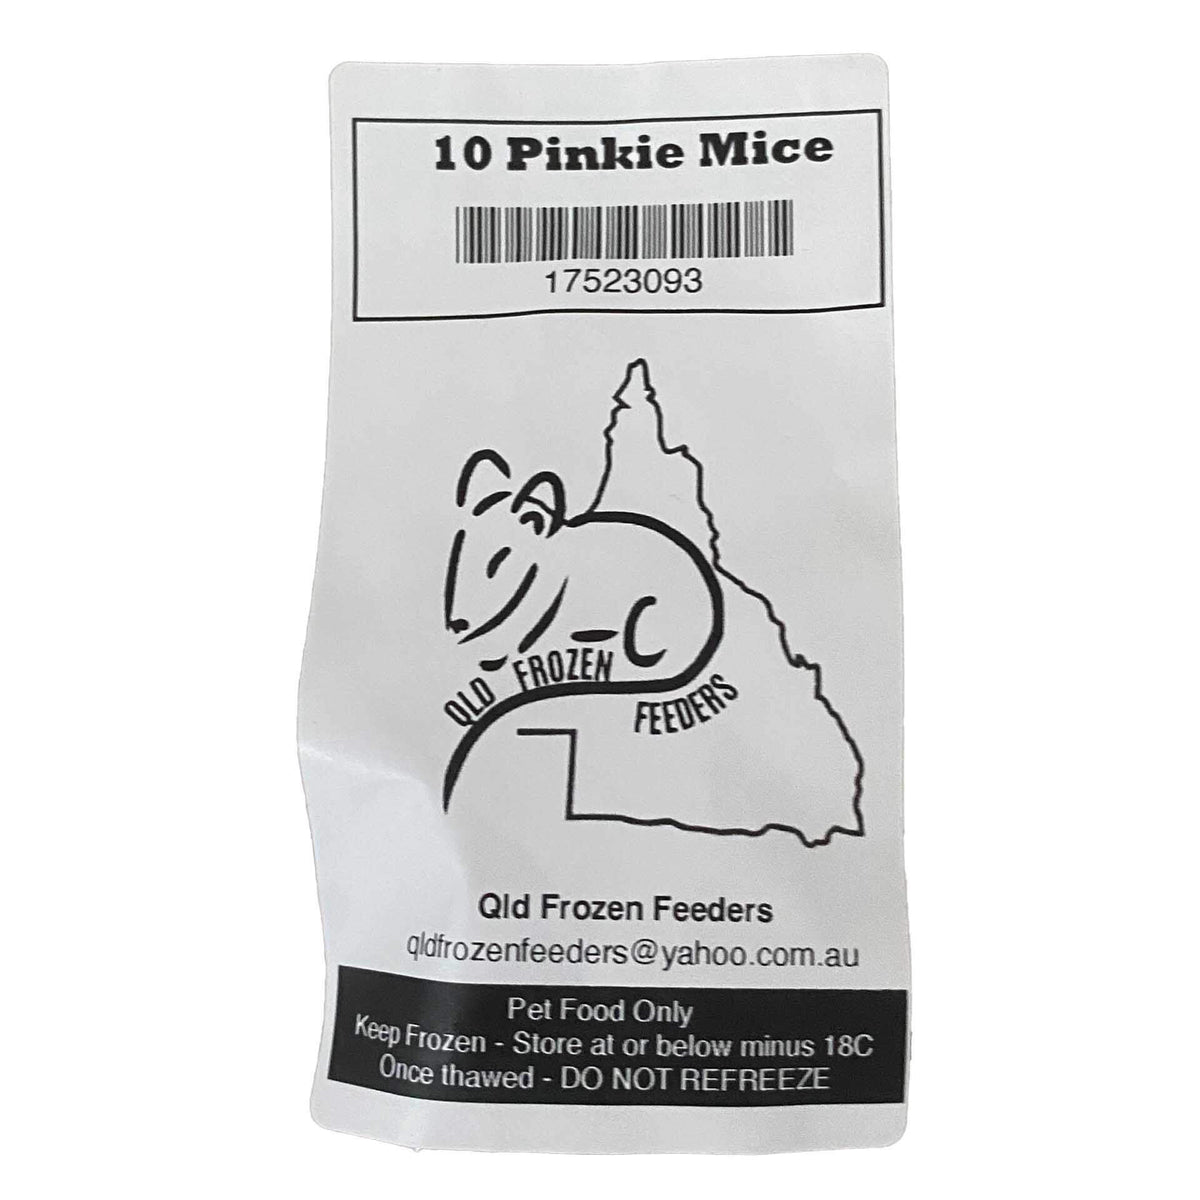 Frozen Feeder Mice - Pinkie - 10 Pack - Frozen Food - In store Pick Up Only